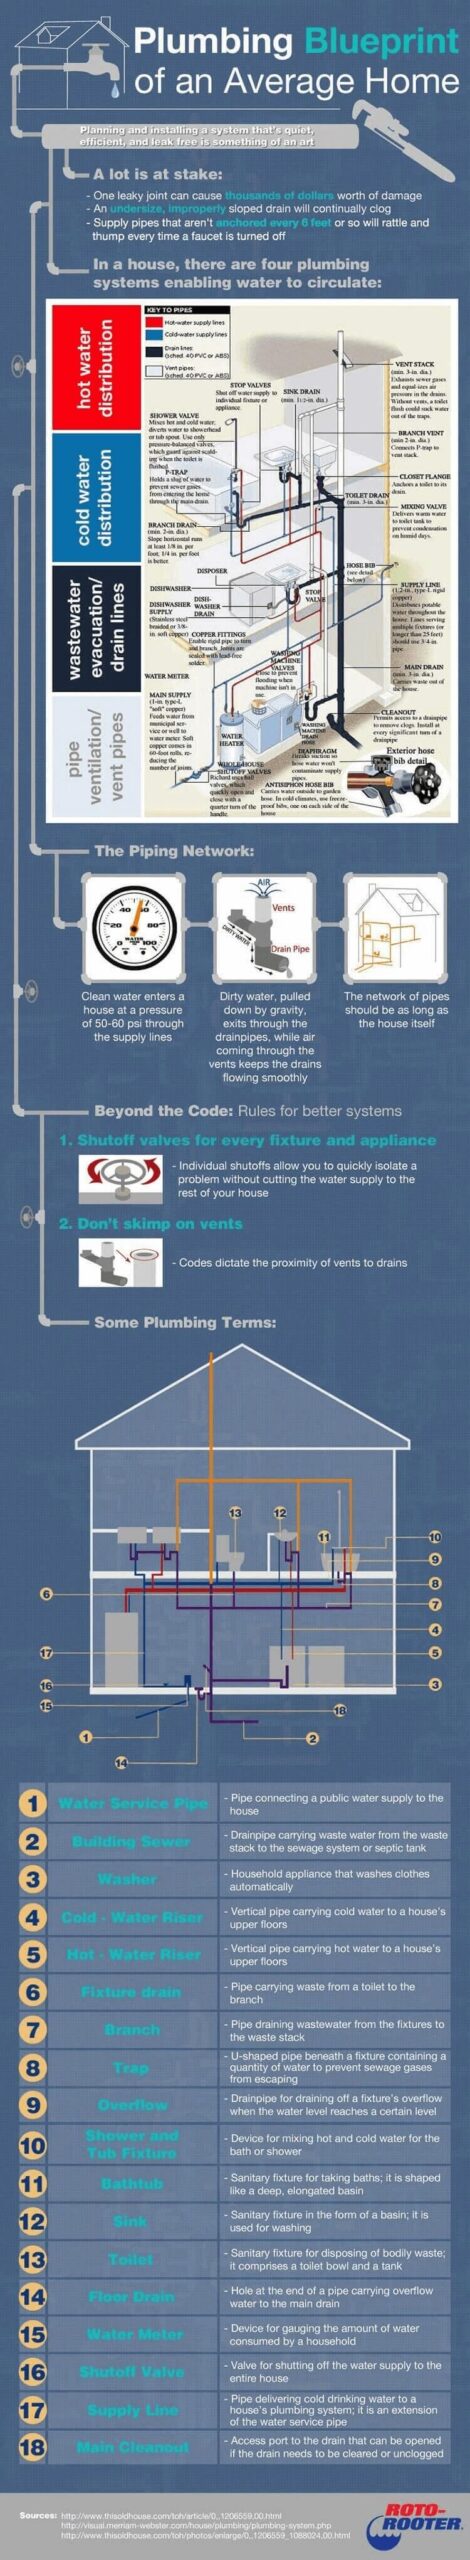 How To Find Plumbing Blueprints For My House?